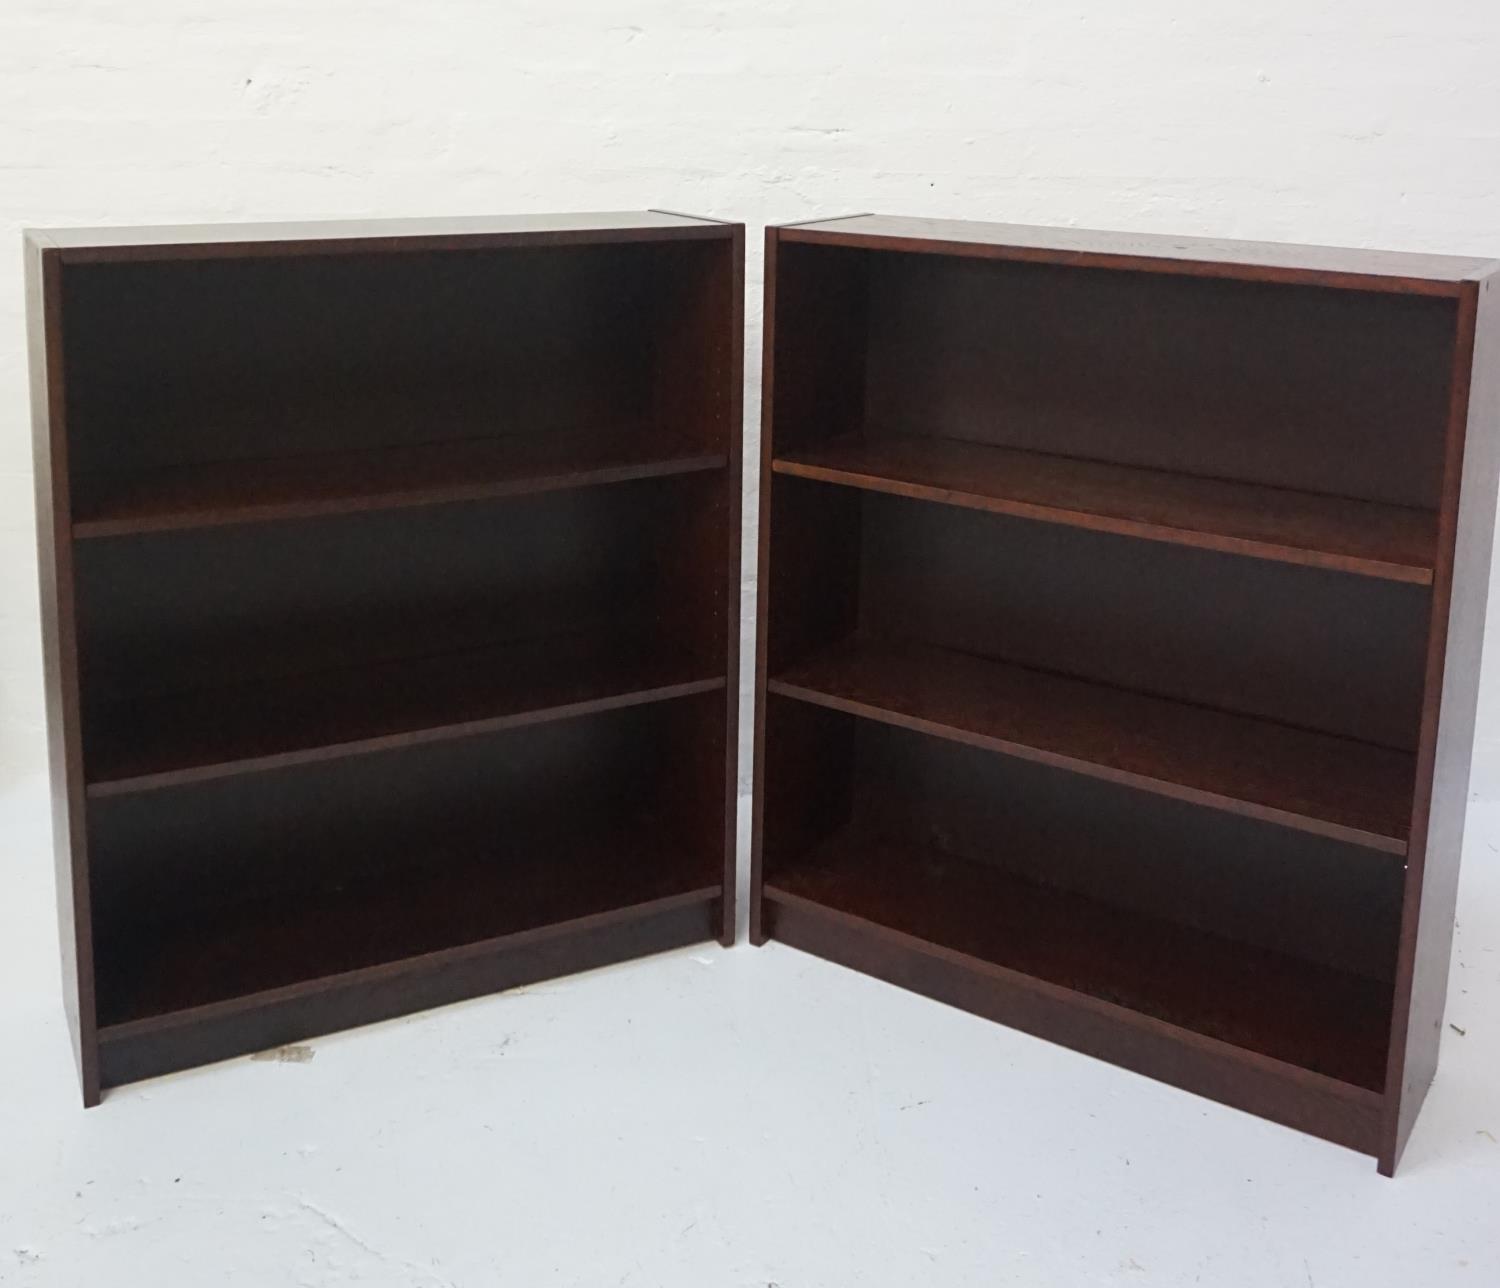 PAIR OF OAK BOOKCASES each with two adjustable shelves, standing on a plinth base, 106cm x 90cm